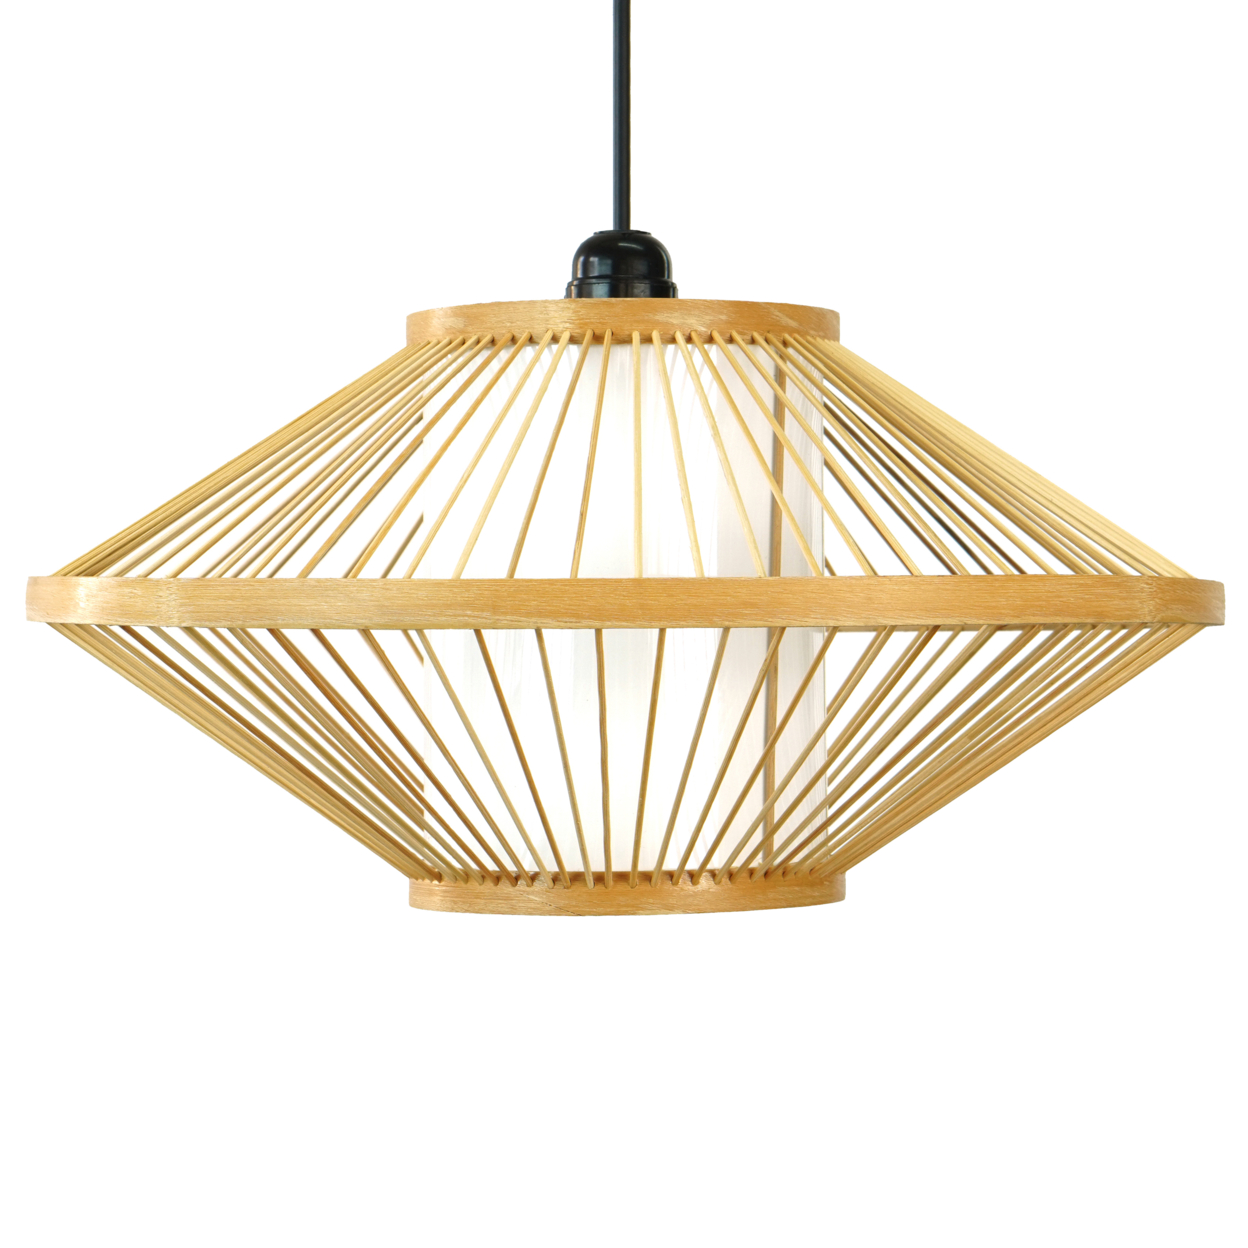 Modern Woven Bamboo Pendant Lighting Hanging Light Shade For Entryway And Living Room